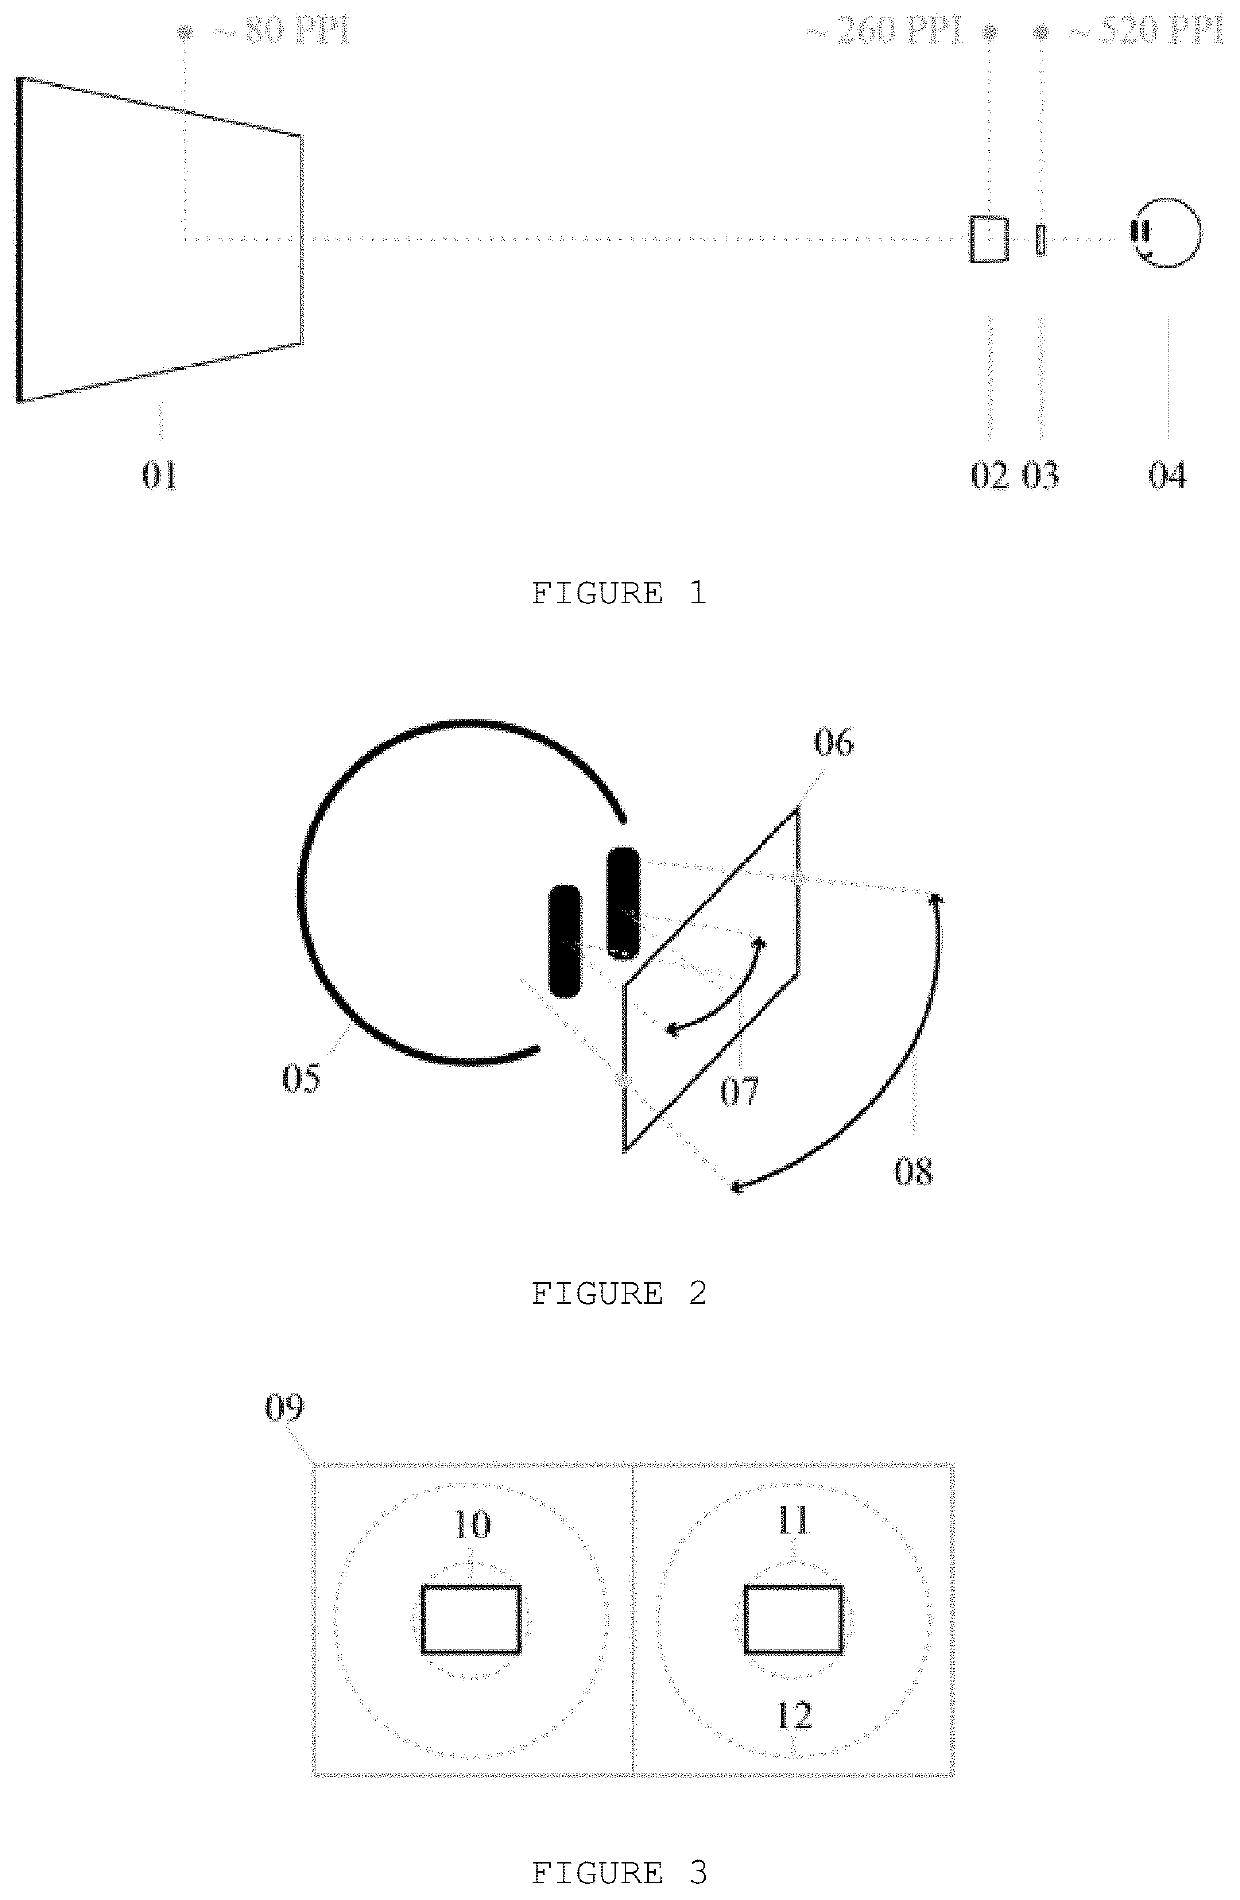 Method for controlling animation's process running on electronic devices